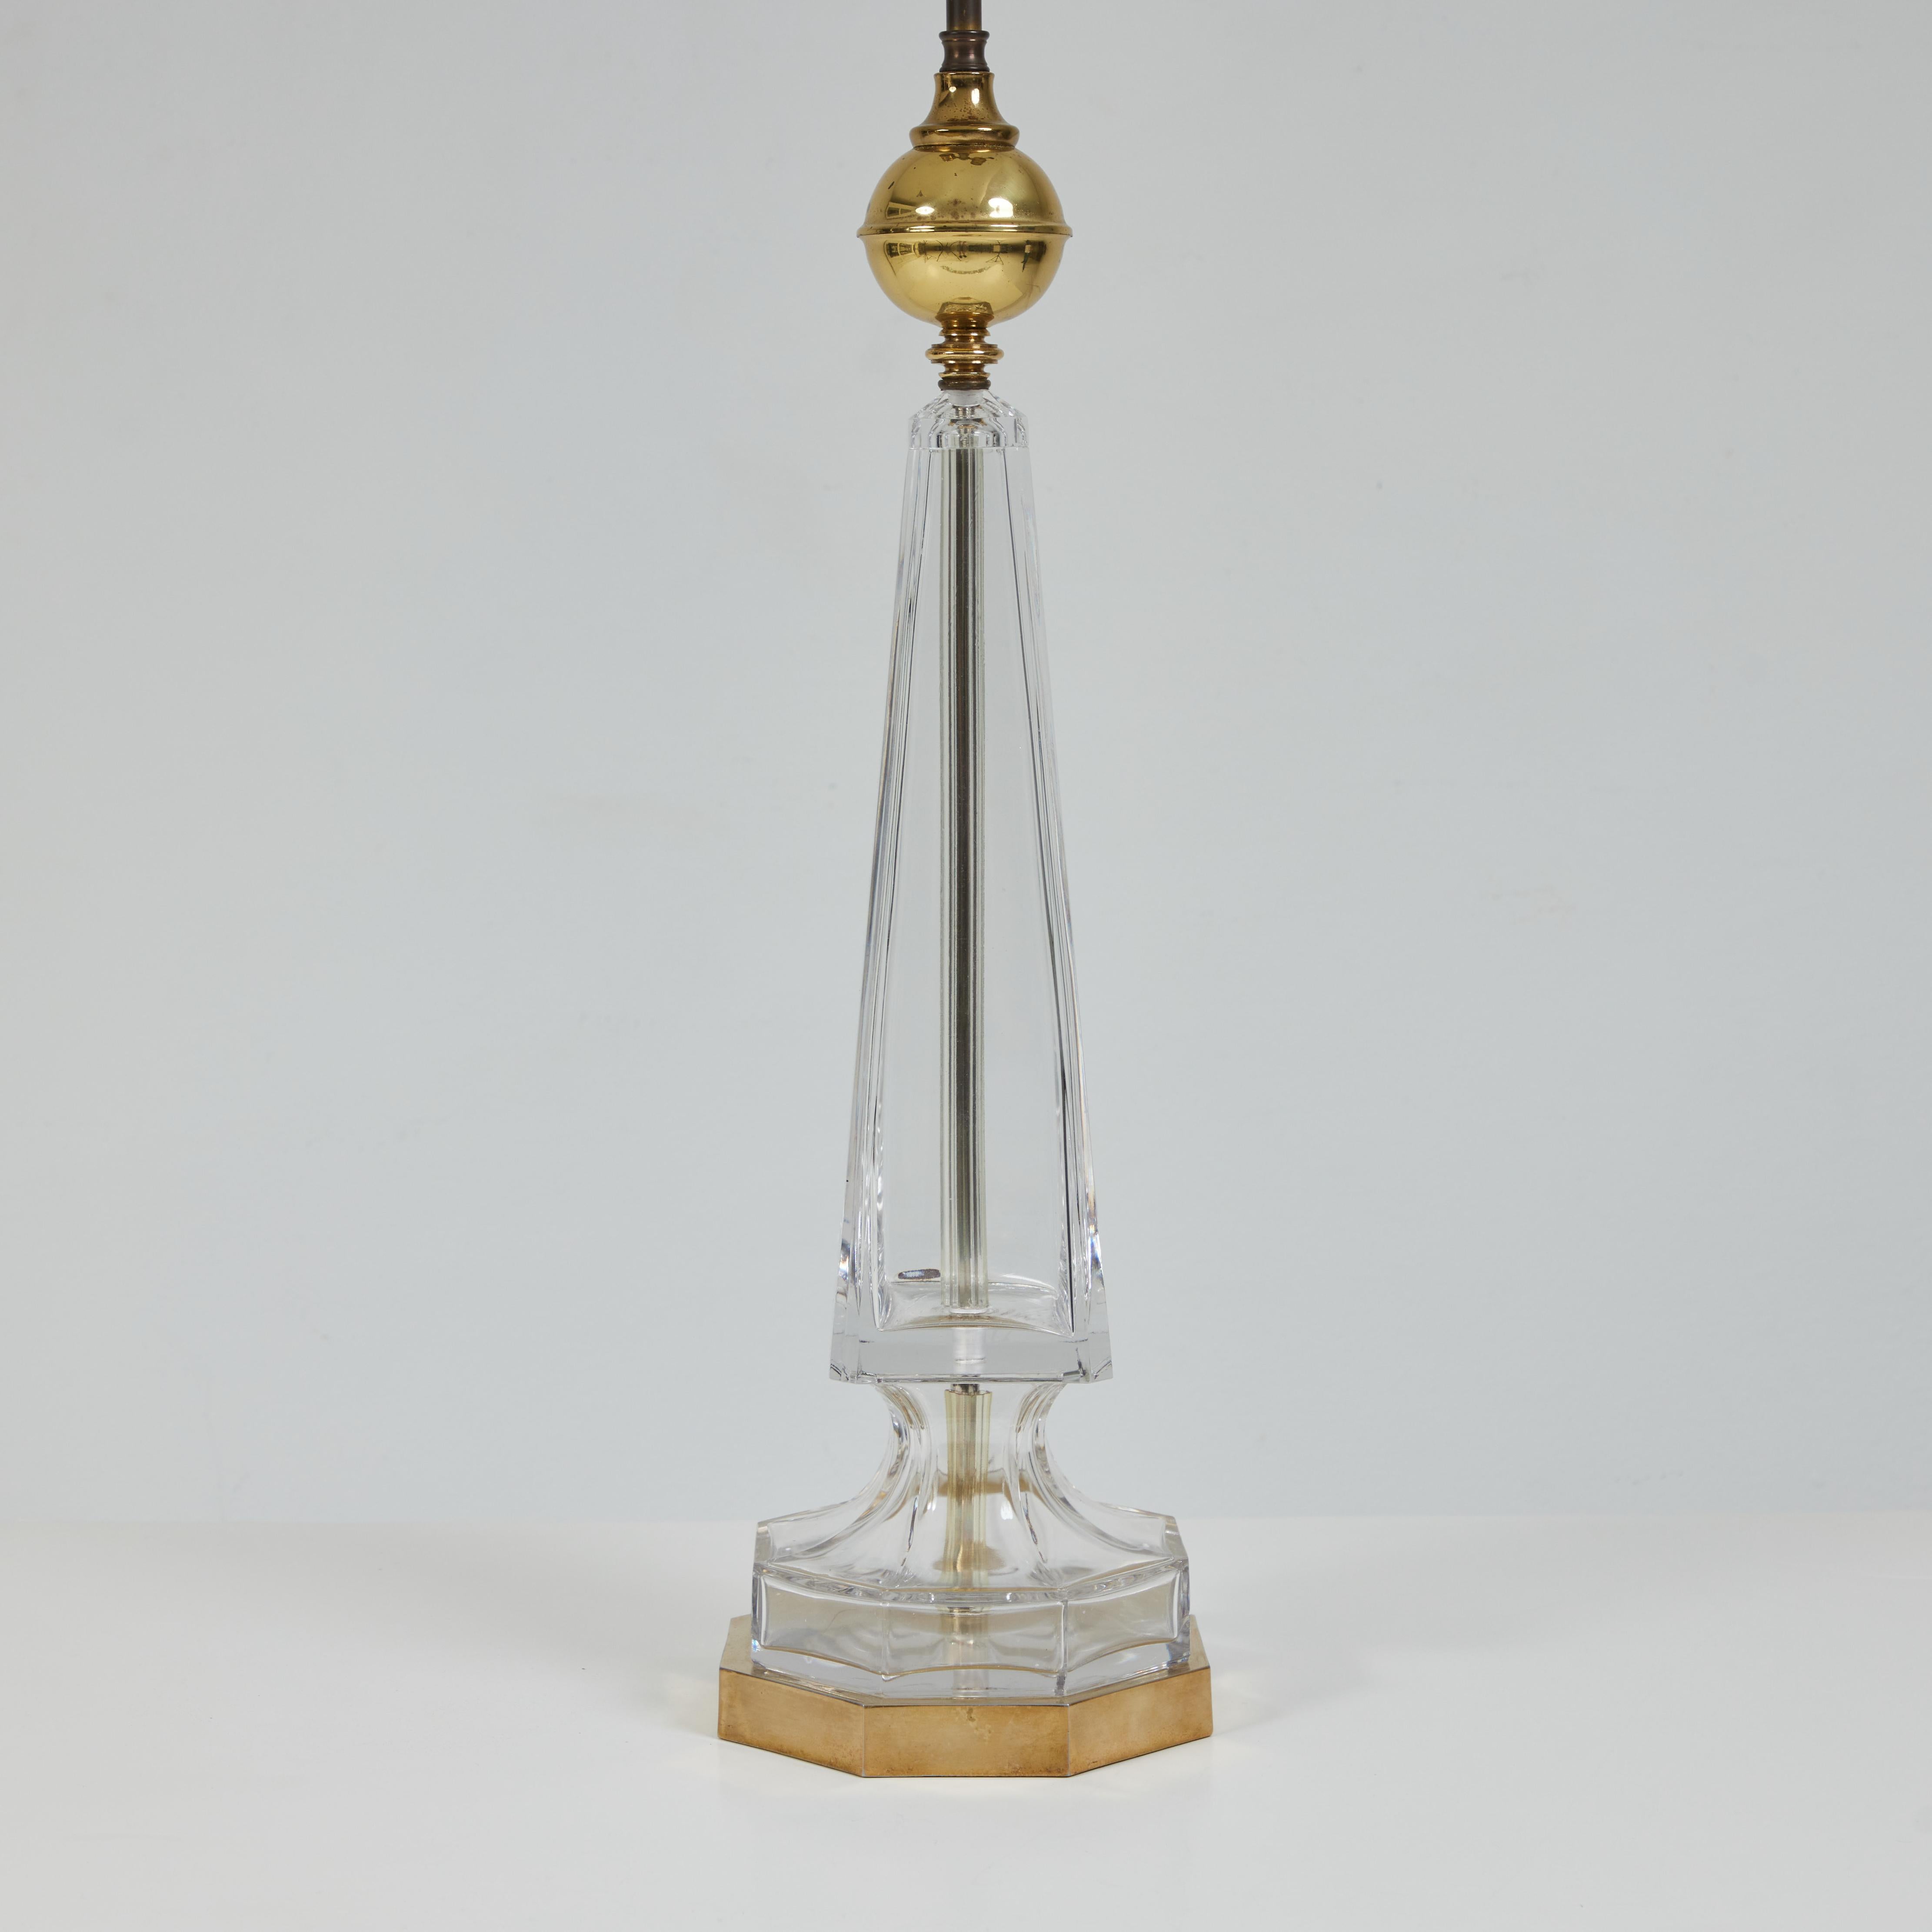 Brass A Pair of Crystal Obelisk Lamps with Silver Leafed Shades, Chapman Lamps 1976 For Sale